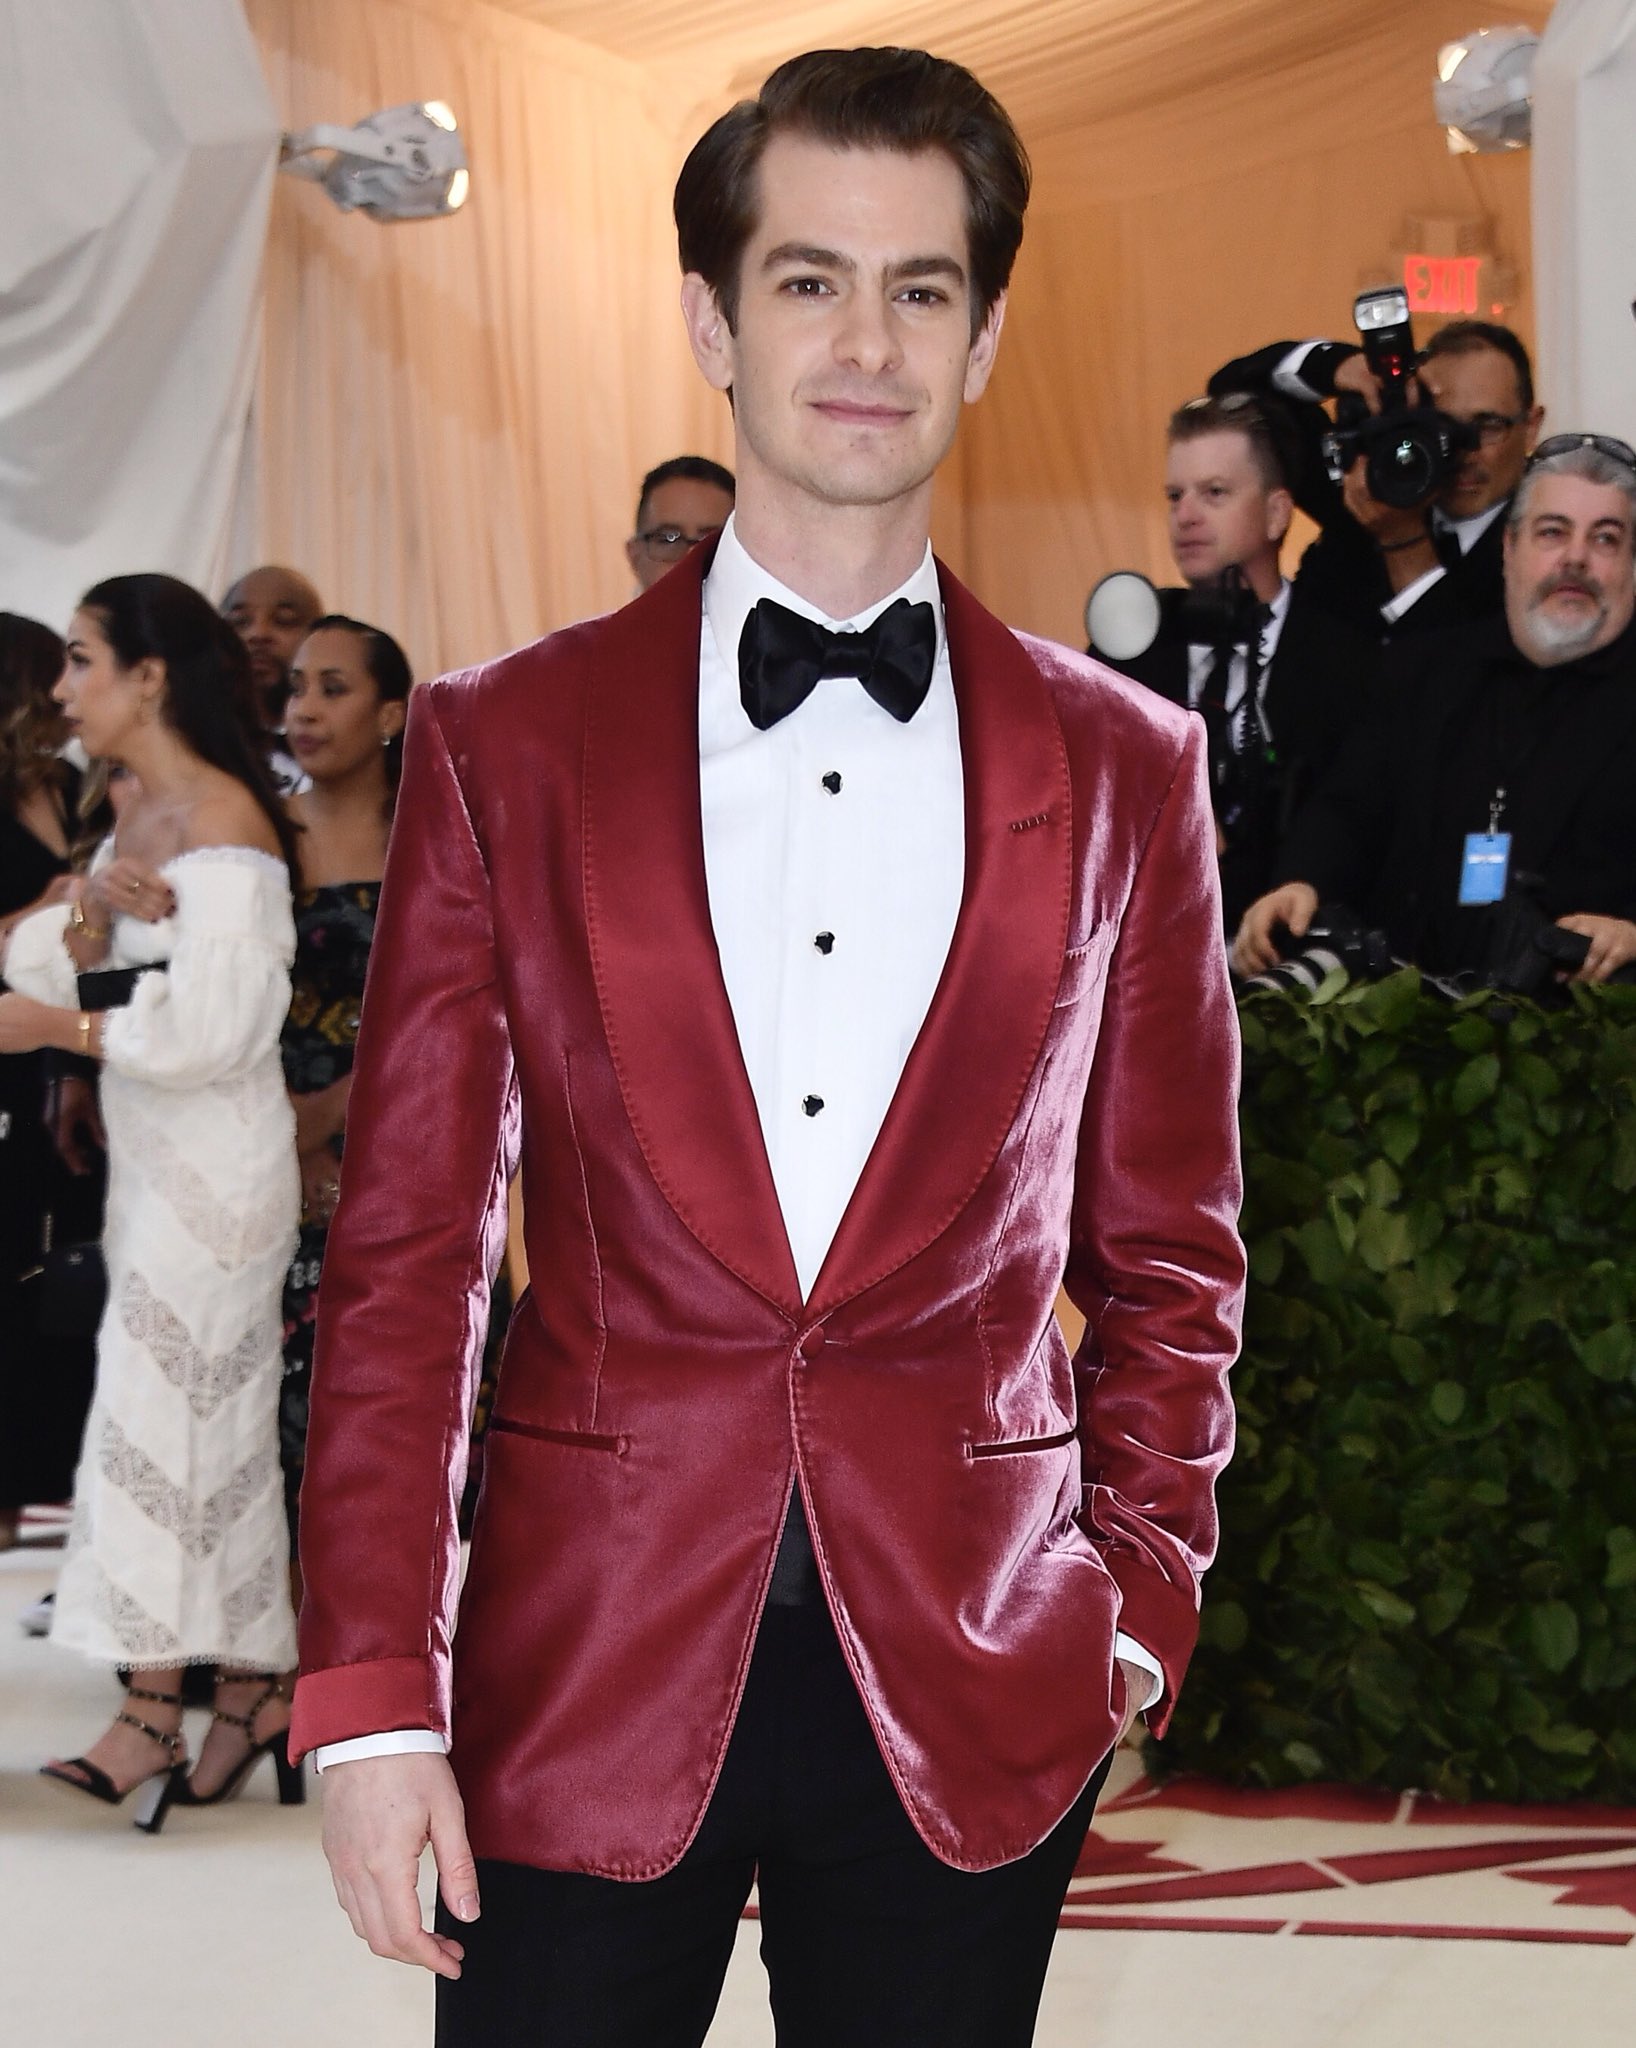 lighed Mark sød smag TOM FORD on Twitter: "Andrew Garfield wore a TOM FORD velvet Shelton  cocktail jacket, pleated evening shirt, satin bow tie and patent evening  shoes to the Met Gala in New York City. #